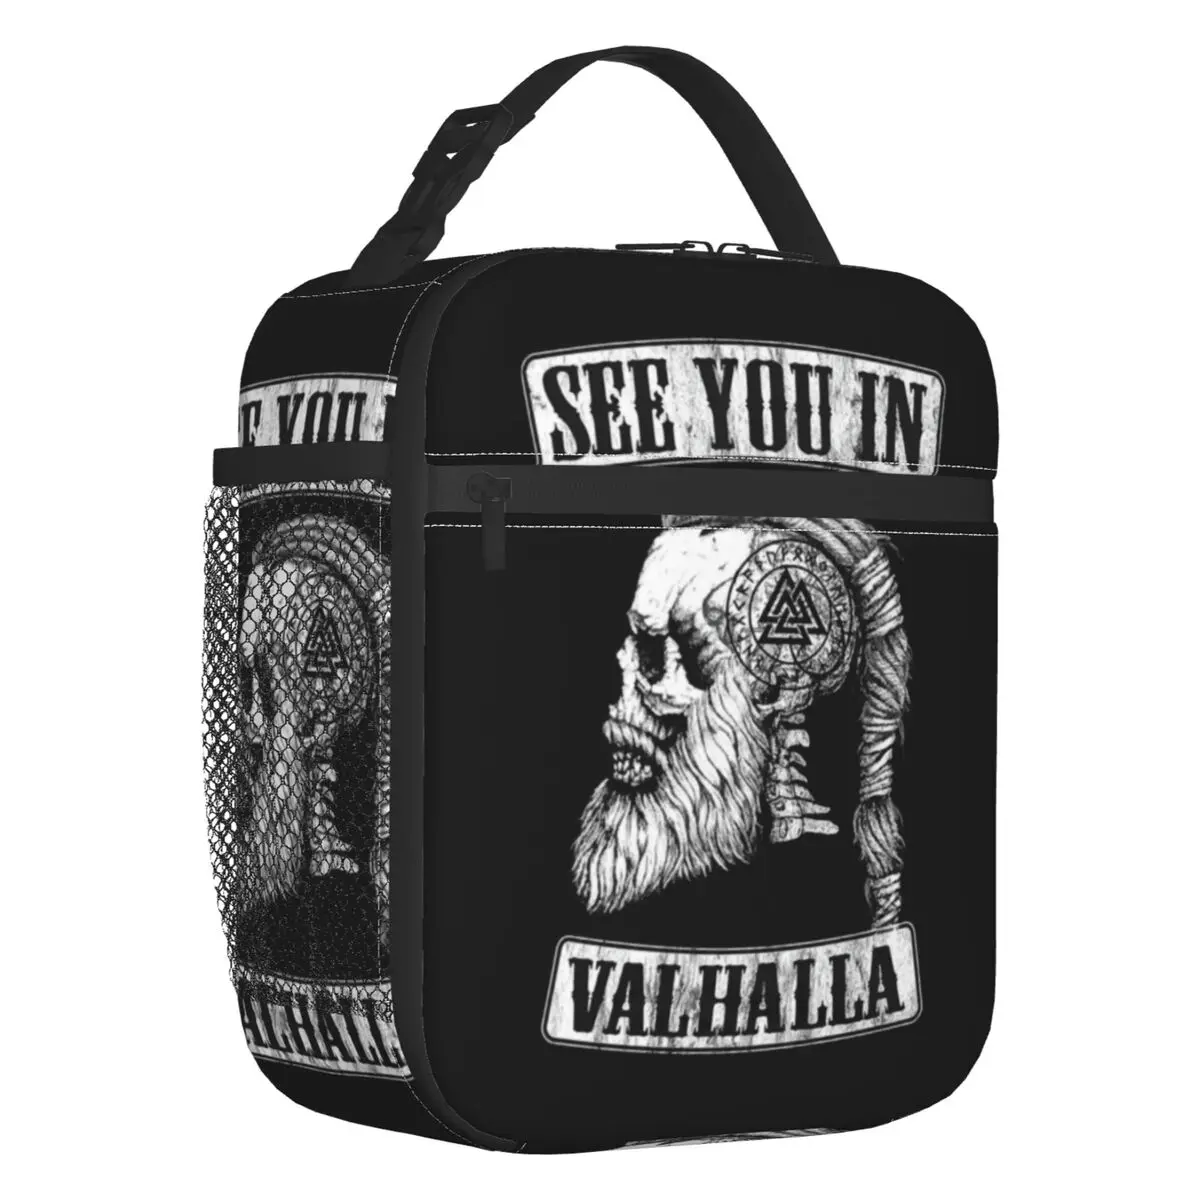 

See You In Valhalla Skull Viking Lunch Boxes Leakproof Norse Odin Ragnar Warrior Cooler Thermal Food Insulated Lunch Bag